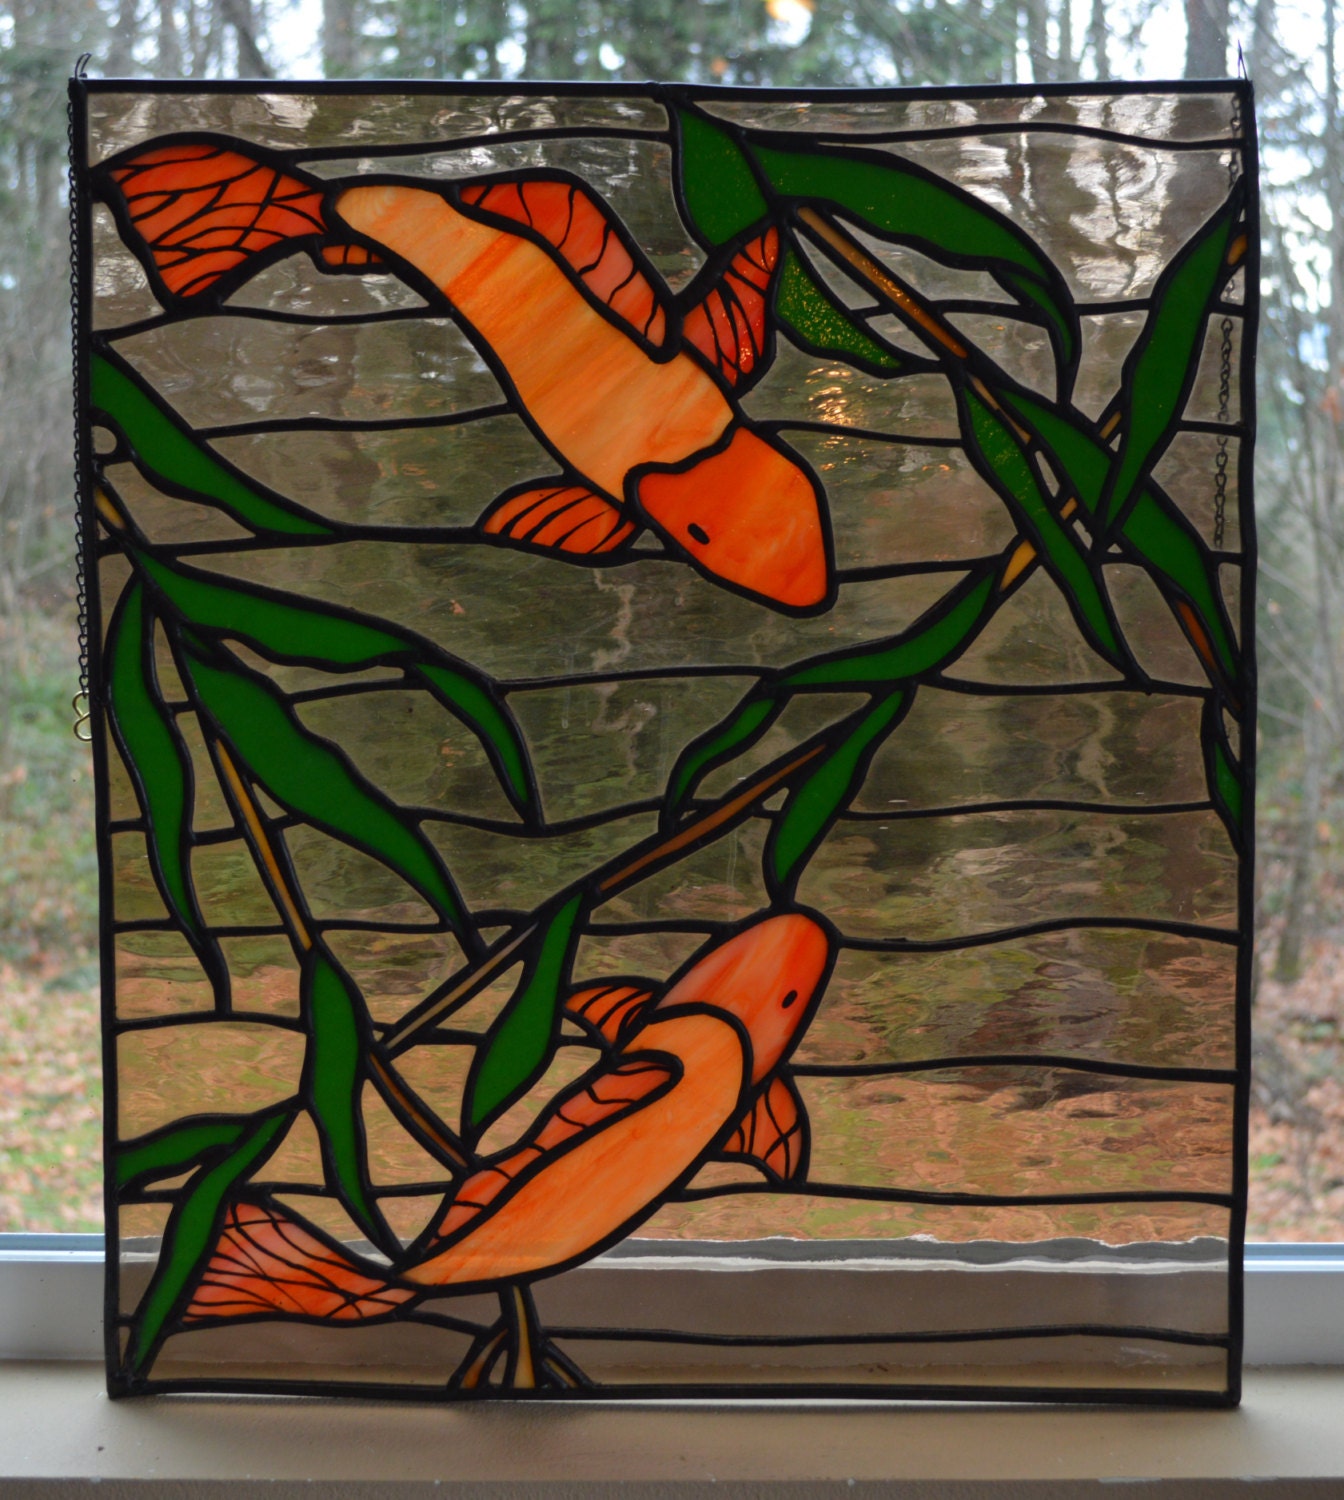 Stained Glass Koi Fish by LiliumGlass on Etsy